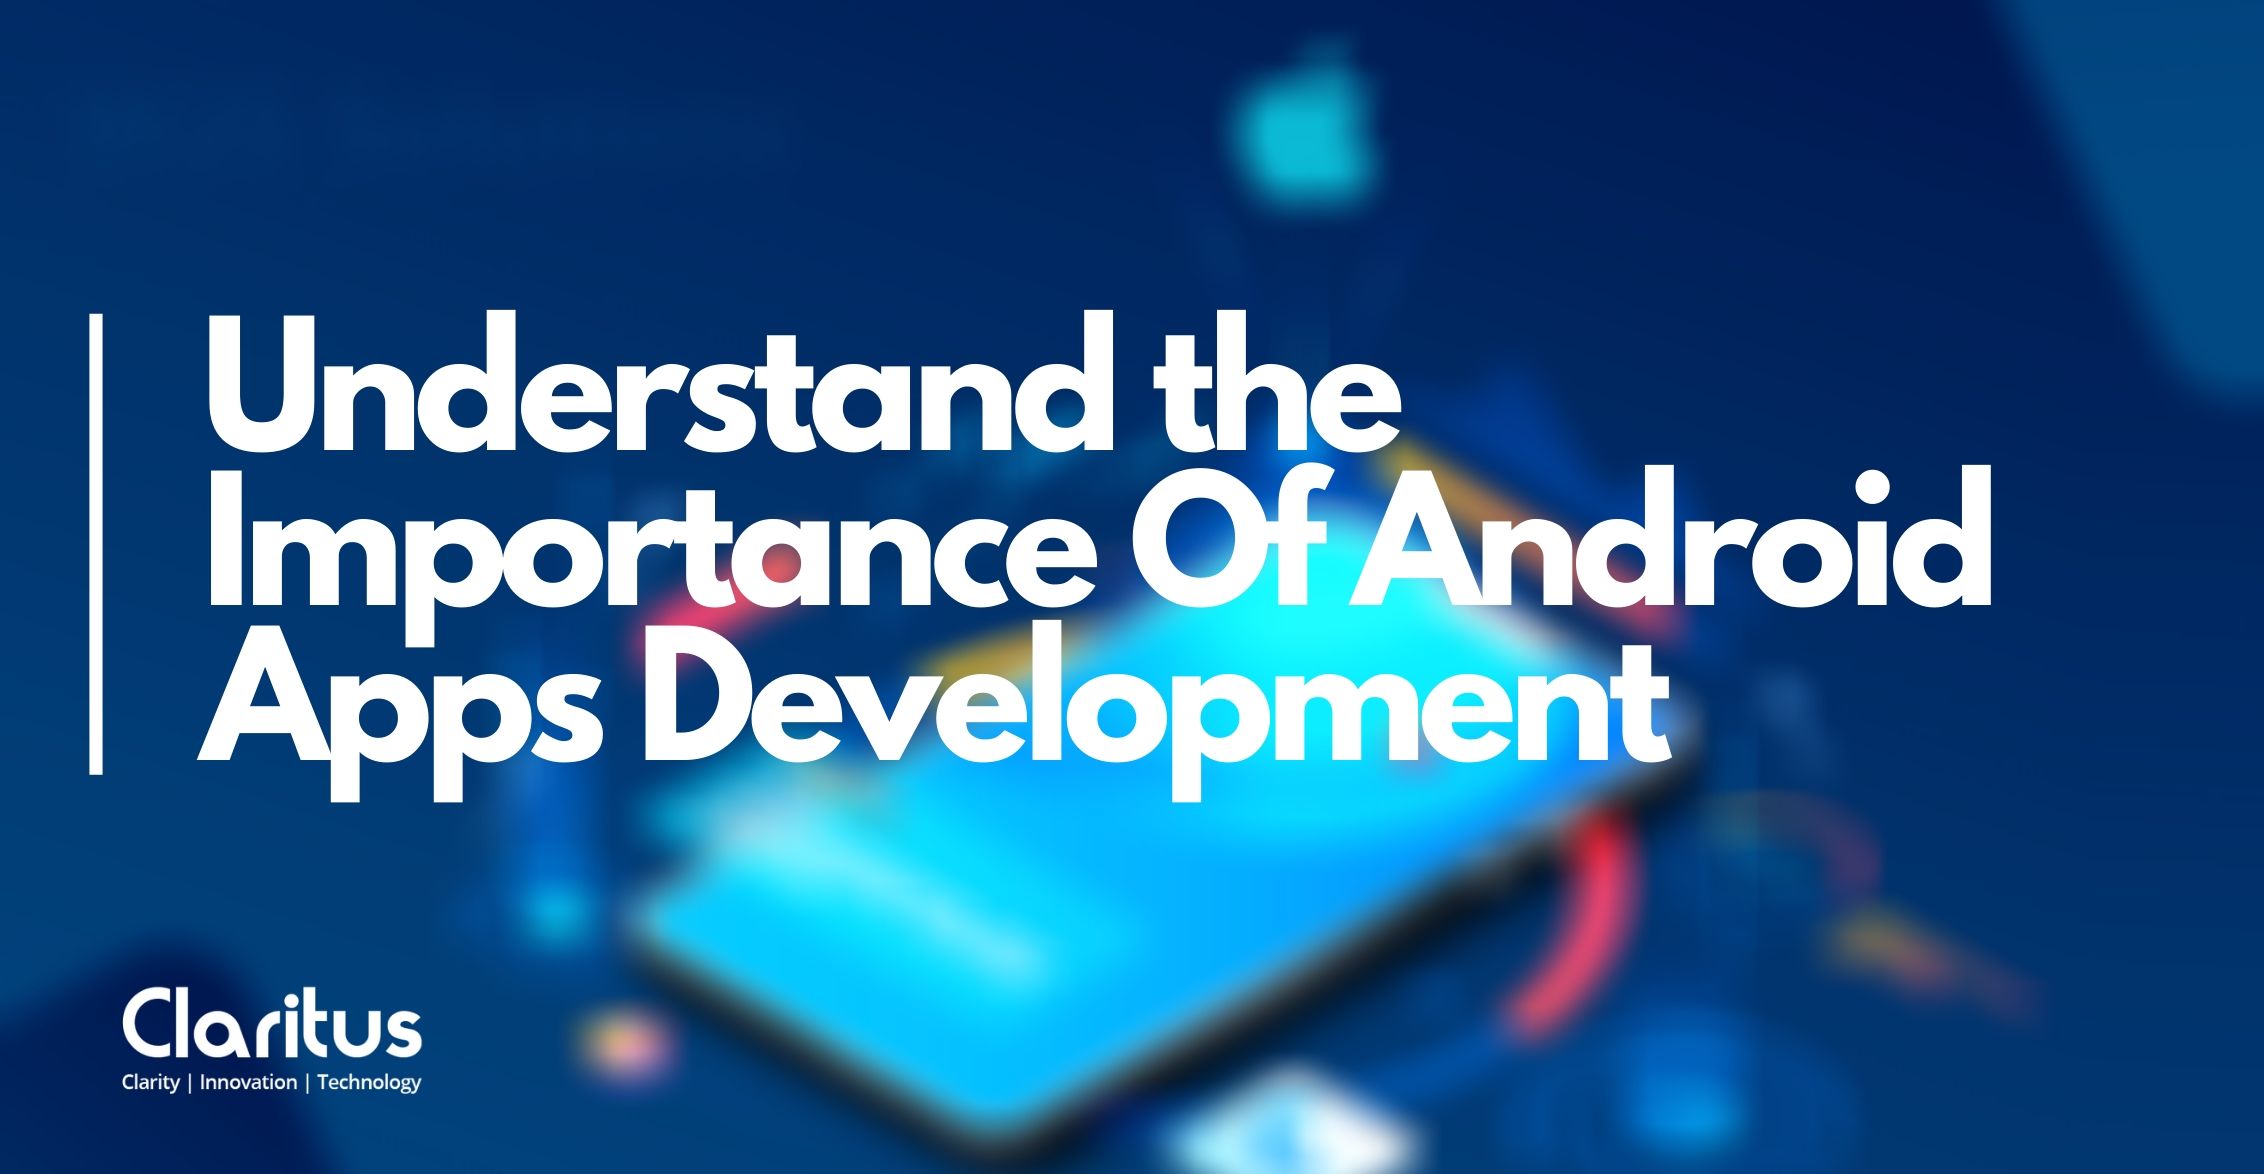 Understand The Importance Of Android Apps Development